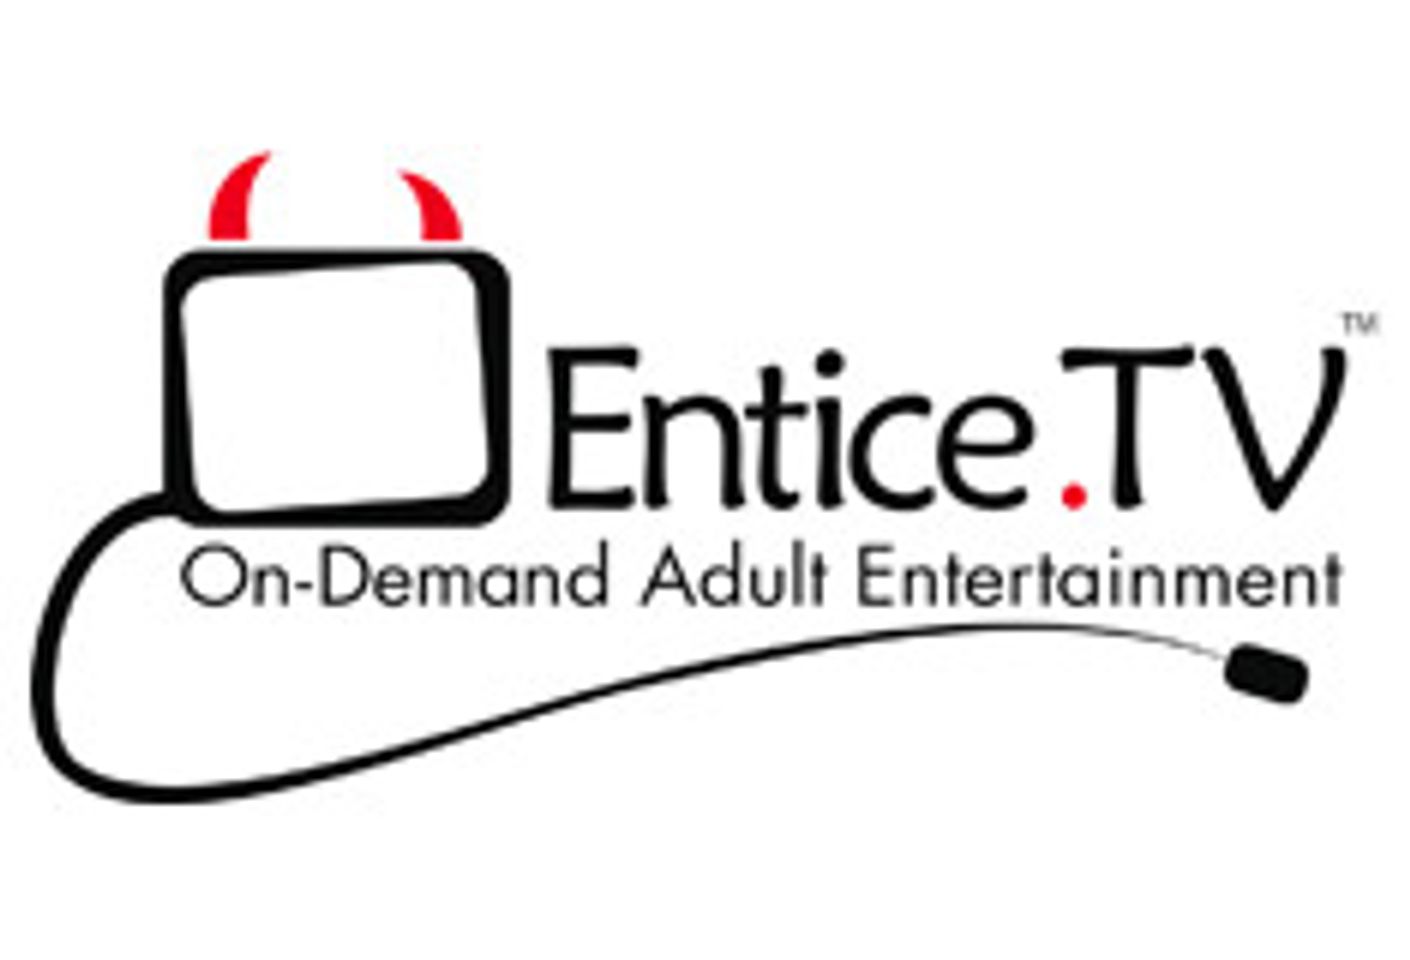 Entice.TV to Launch in Vegas